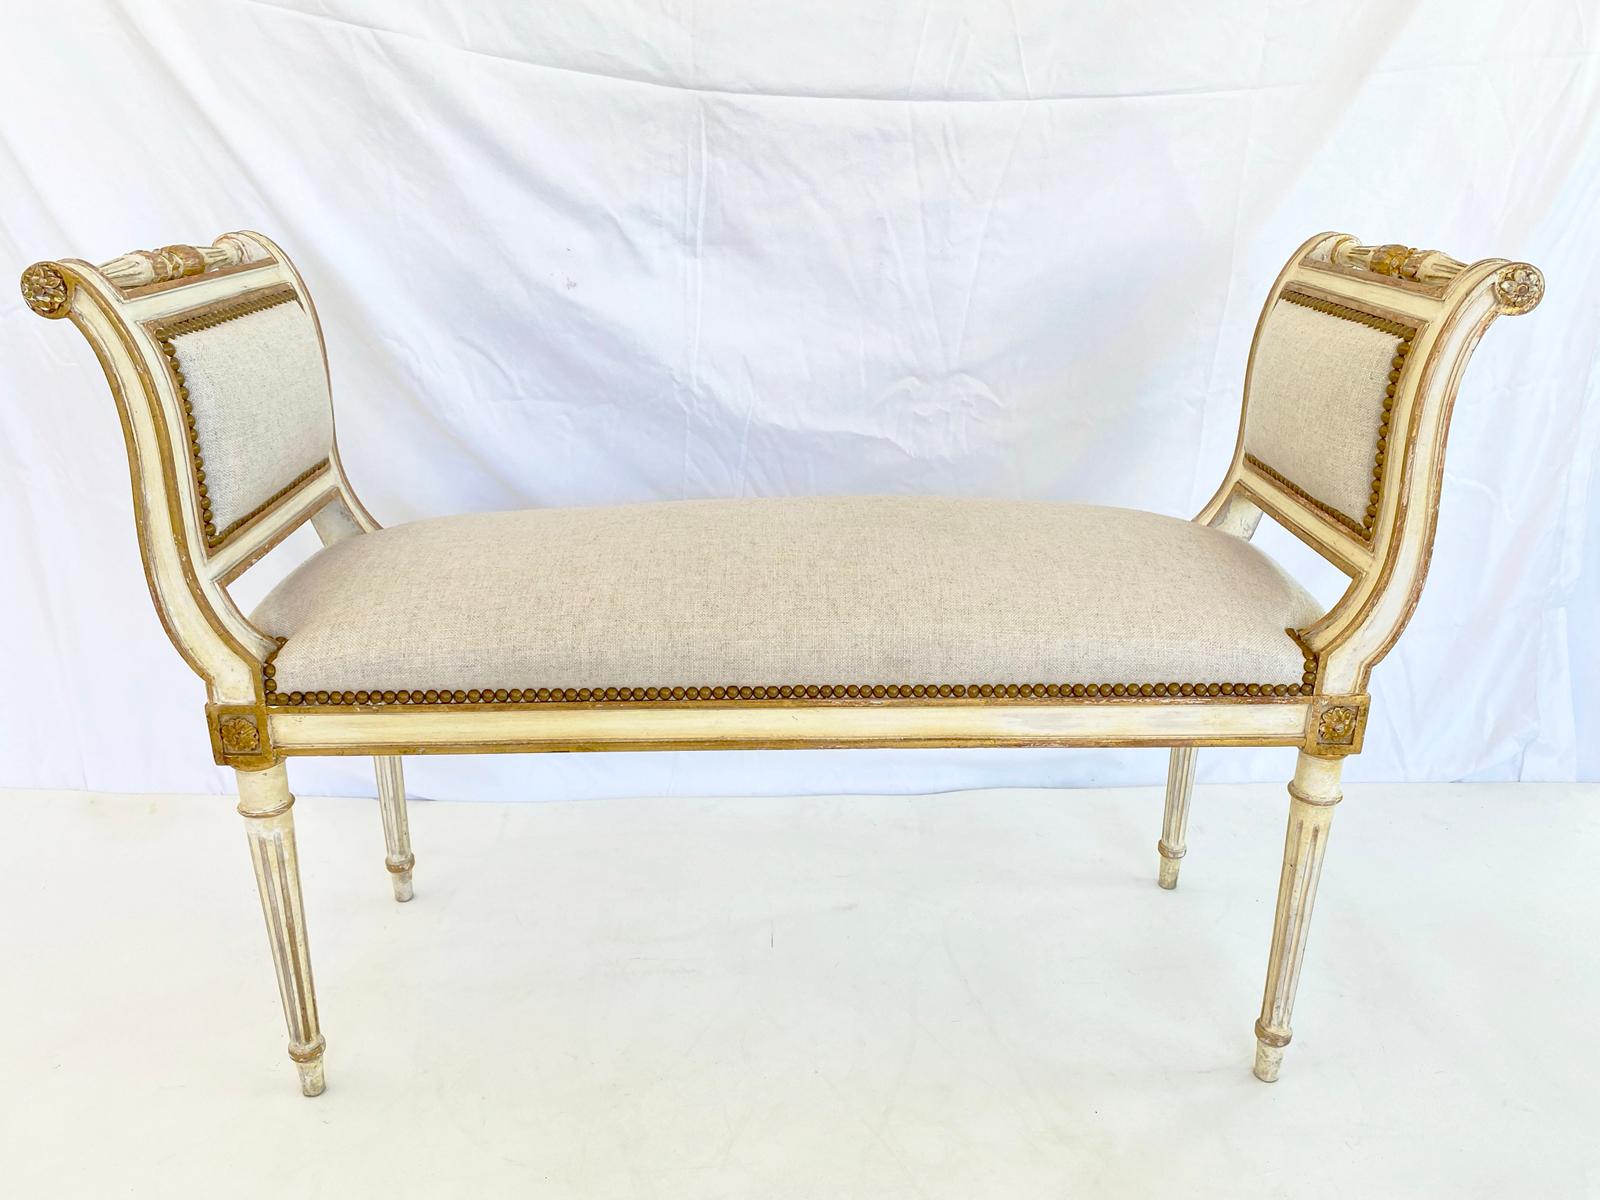 Painted and Parcel Gilt Louis XVI Style Window Seat Bench In Good Condition For Sale In West Palm Beach, FL